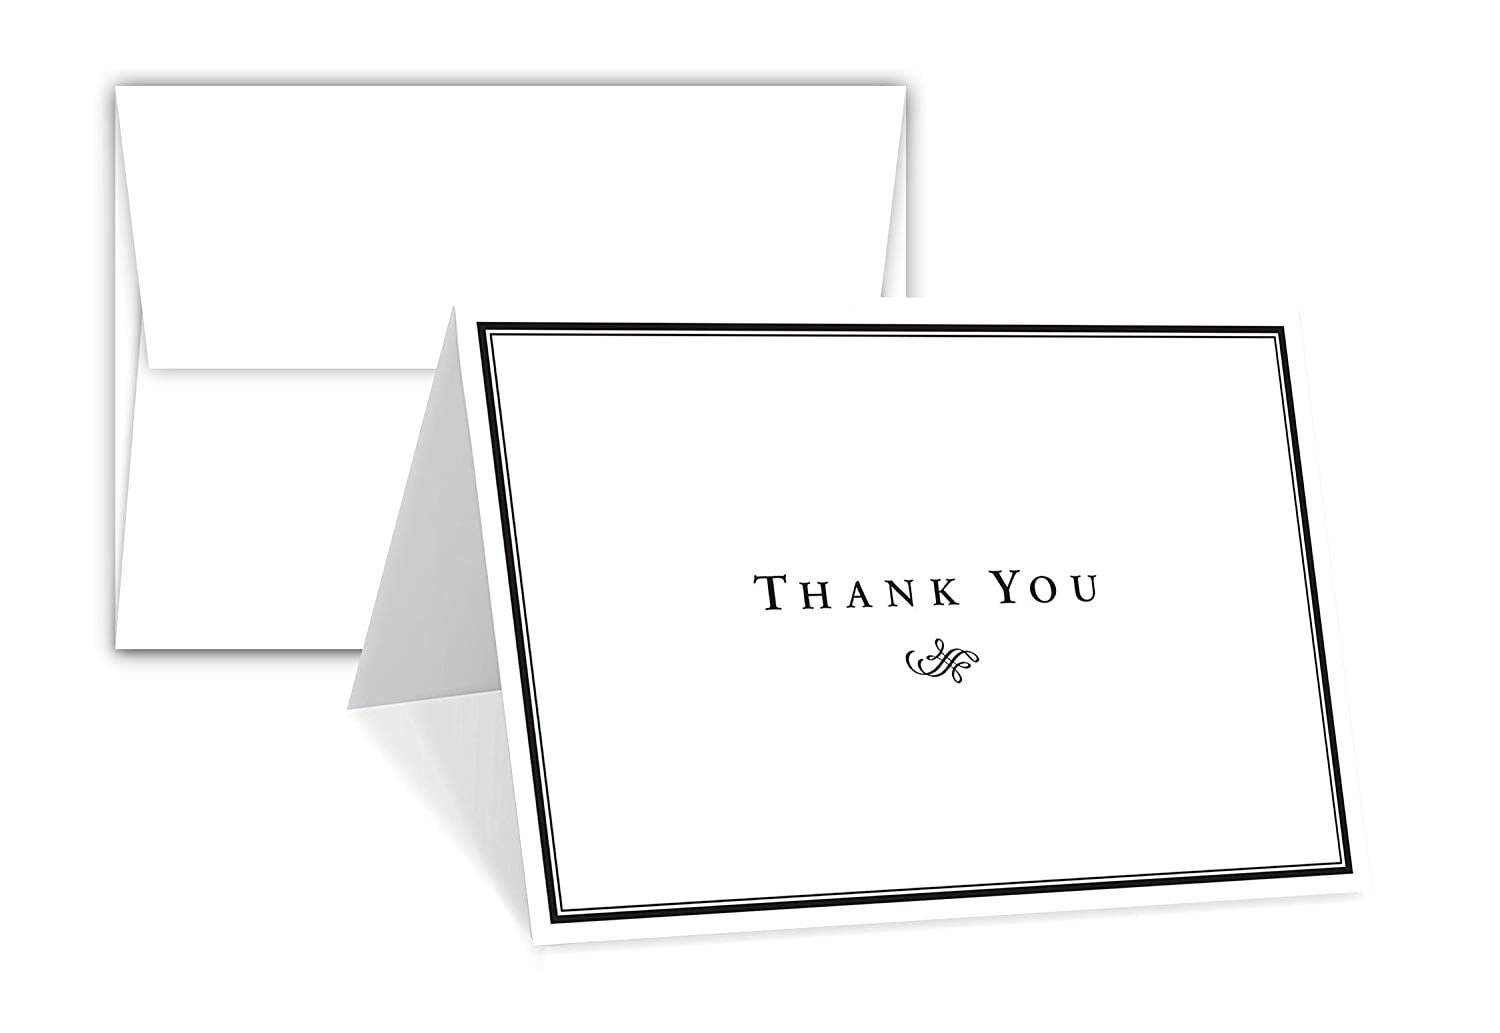 Details about   Blank Cards HALLMARK BLANK STATIONERY CARDS 4 X 5...THANK YOUS 